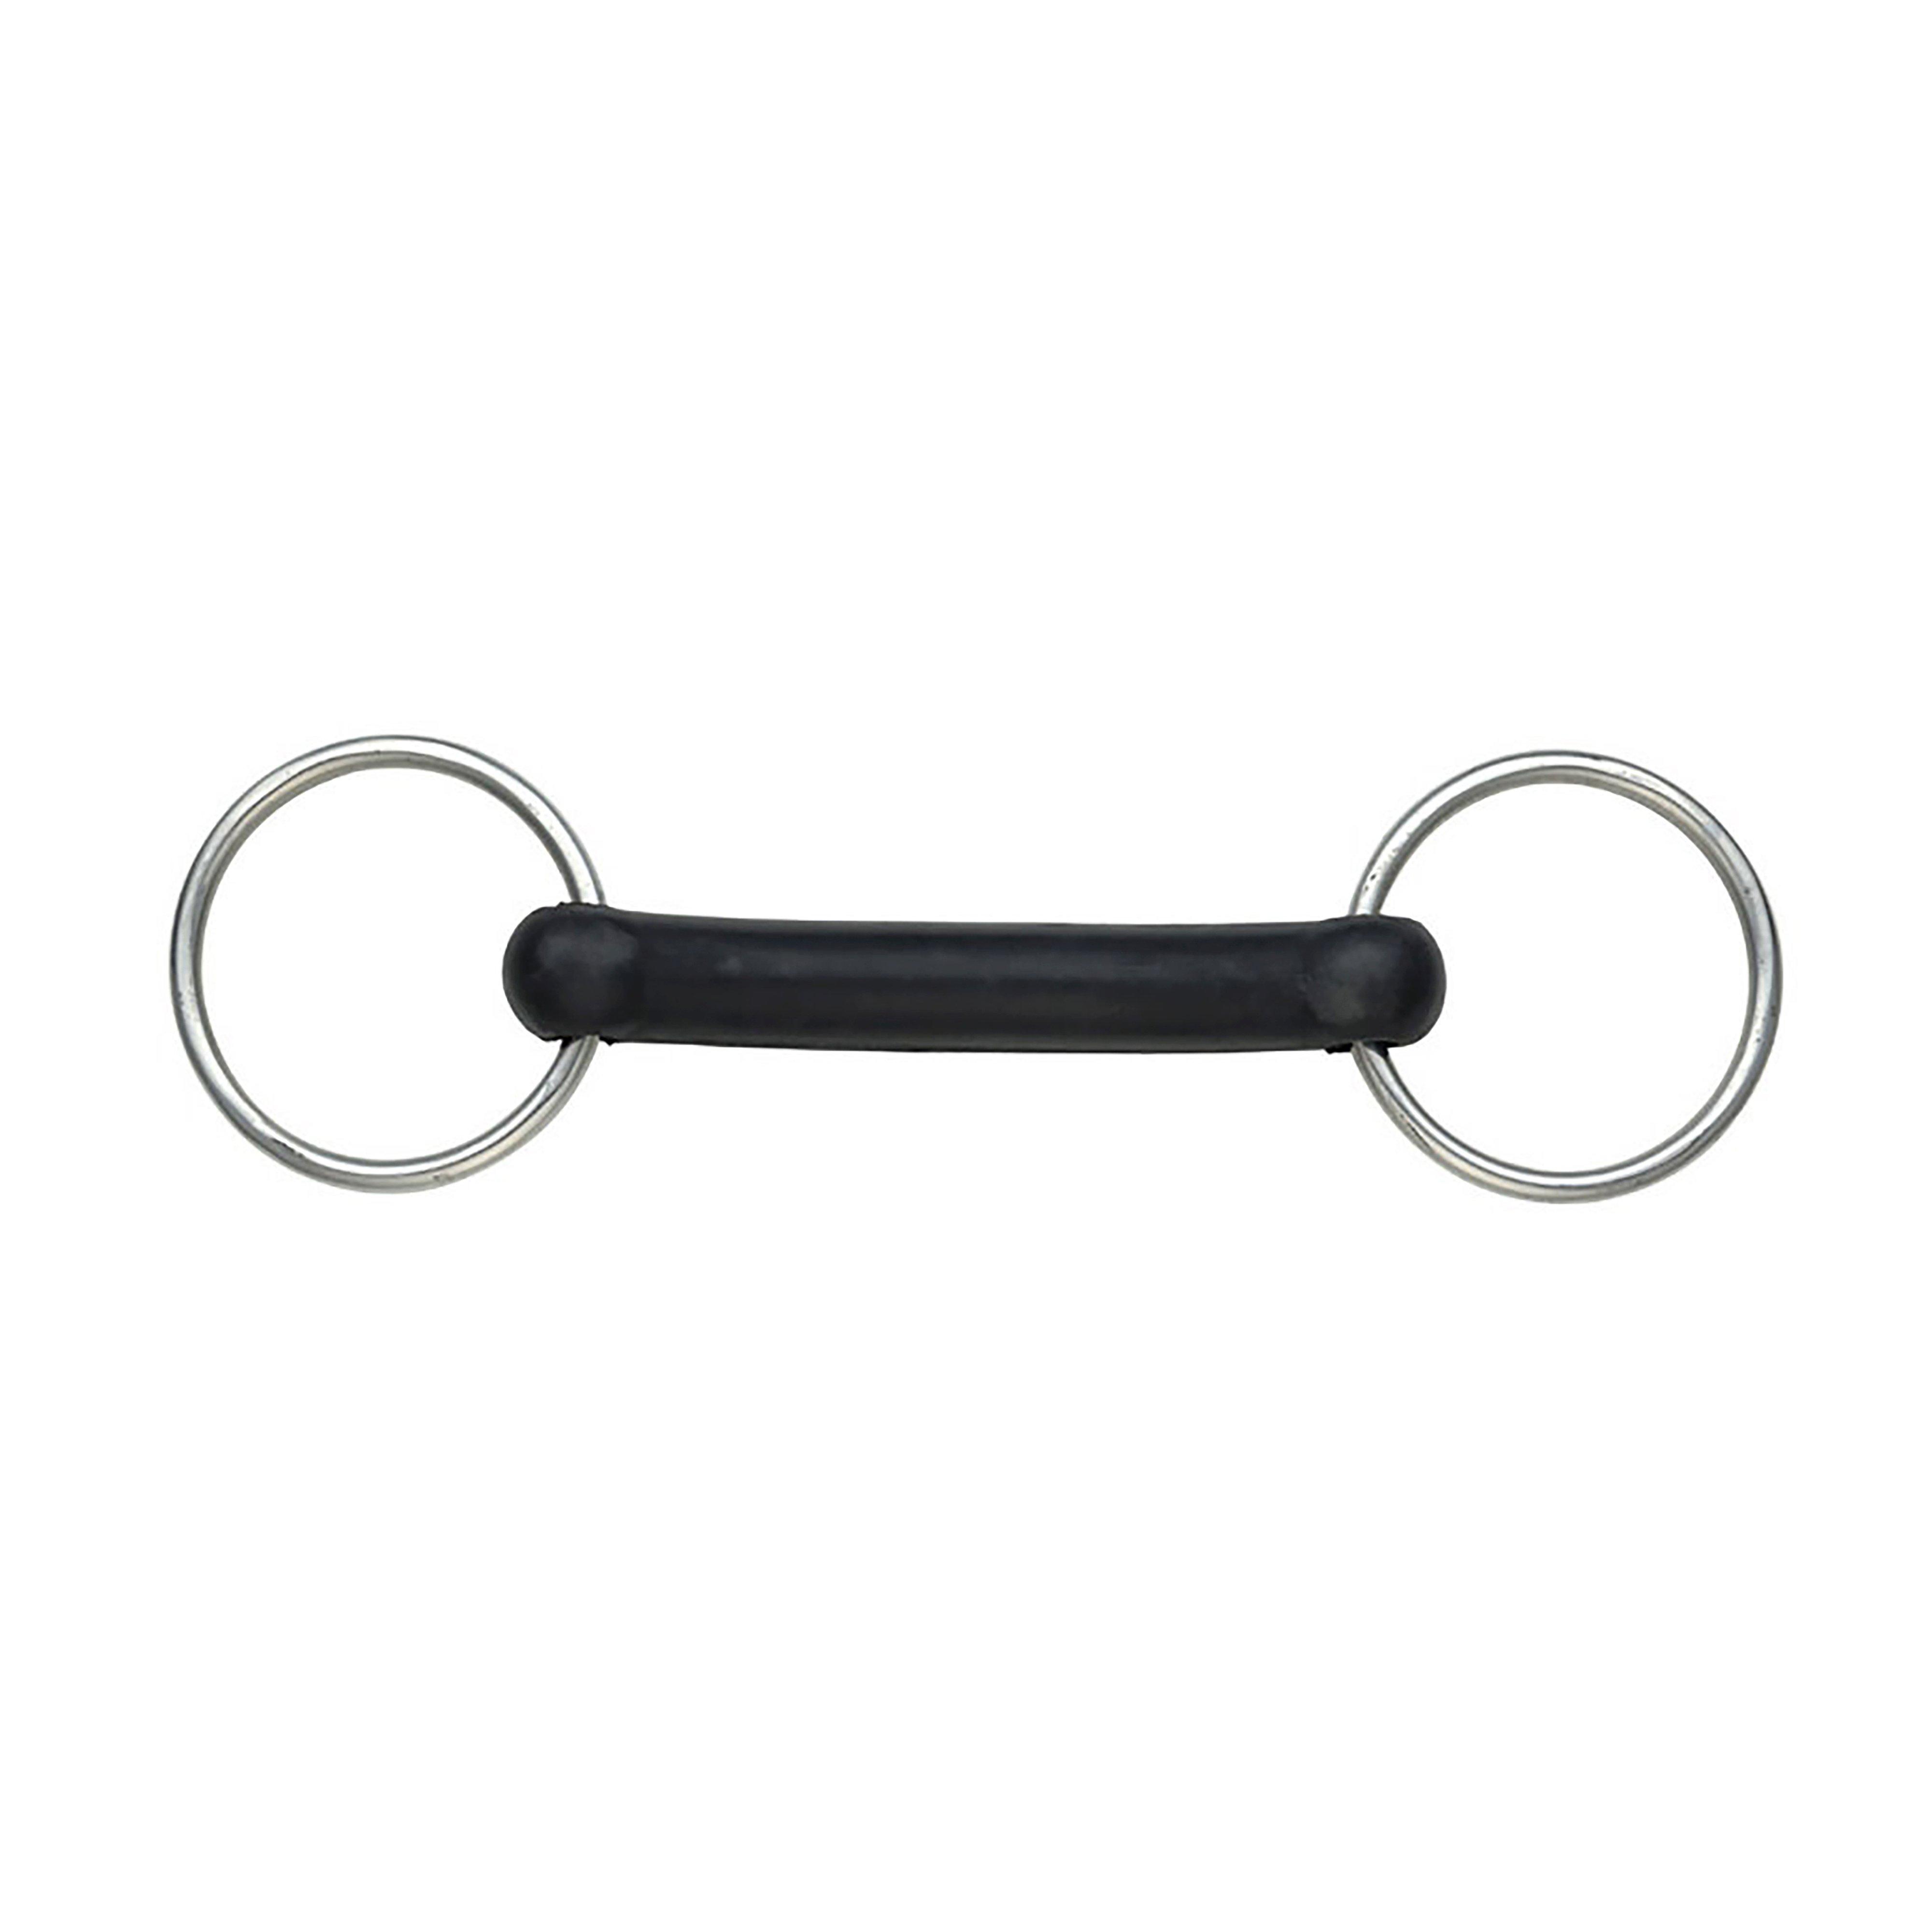 Flexible Rubber Mouth Snaffle